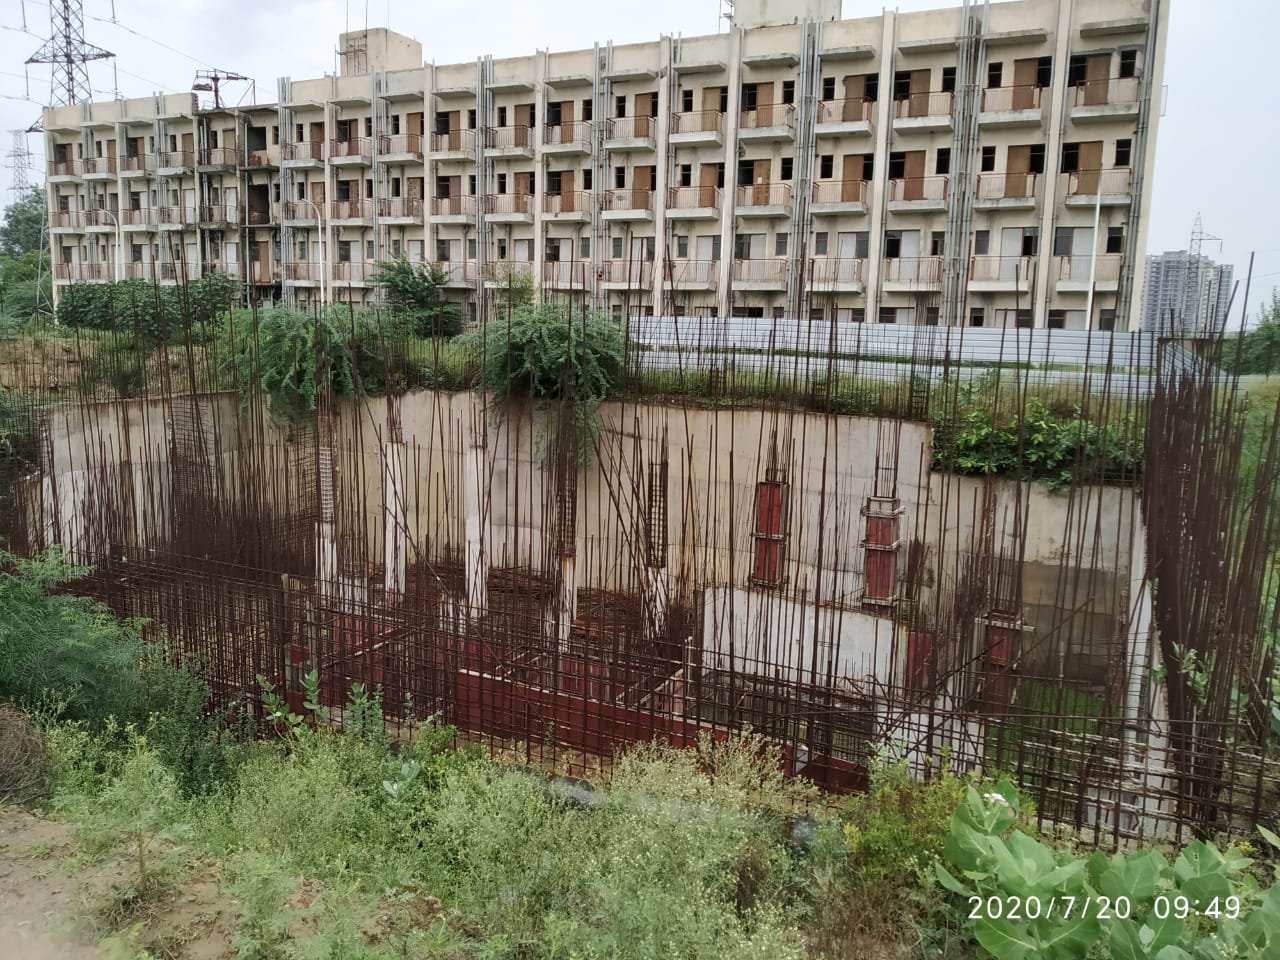 how kabul chawla bptp ltd ruined our homebuyer lives? - kreately